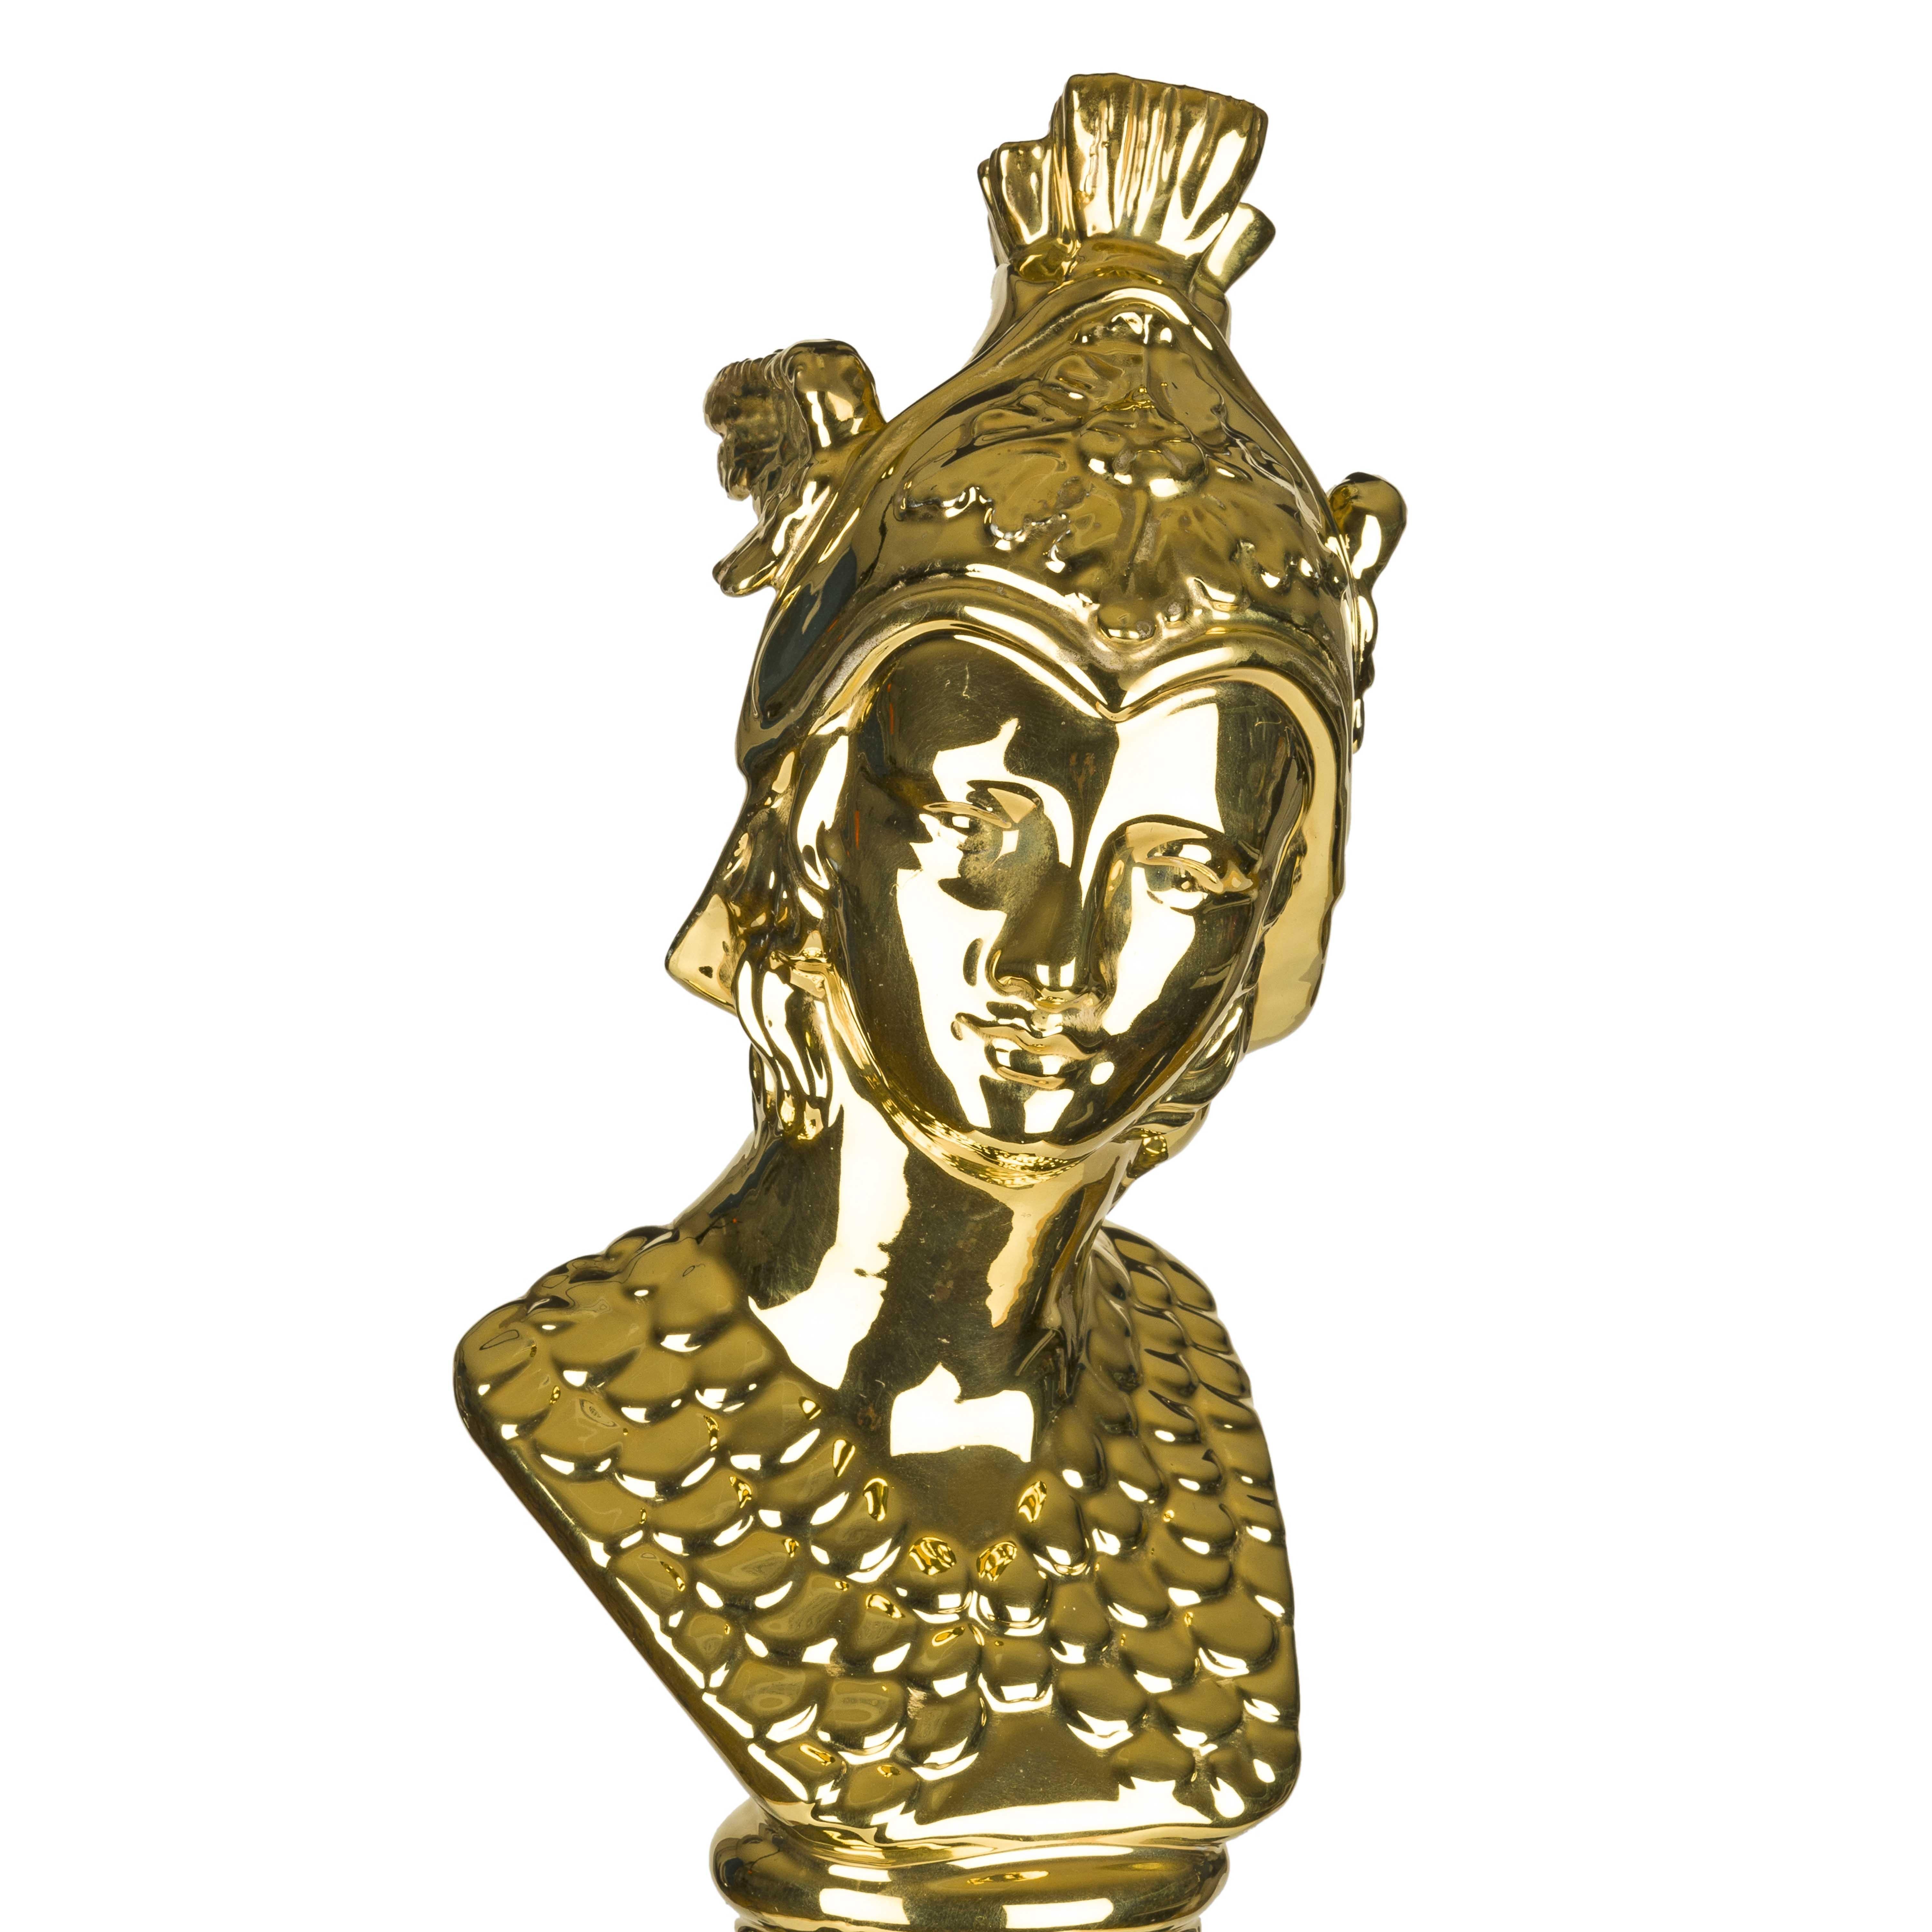 LF- The Luck of the Gods
A sculpture, an ornament, a muse, a talisman... LF's ancient deities are a friendly lot, ready to bring a whimsical touch of the Classics into your life. With fine ceramic from the Venetian area, traditional Italian